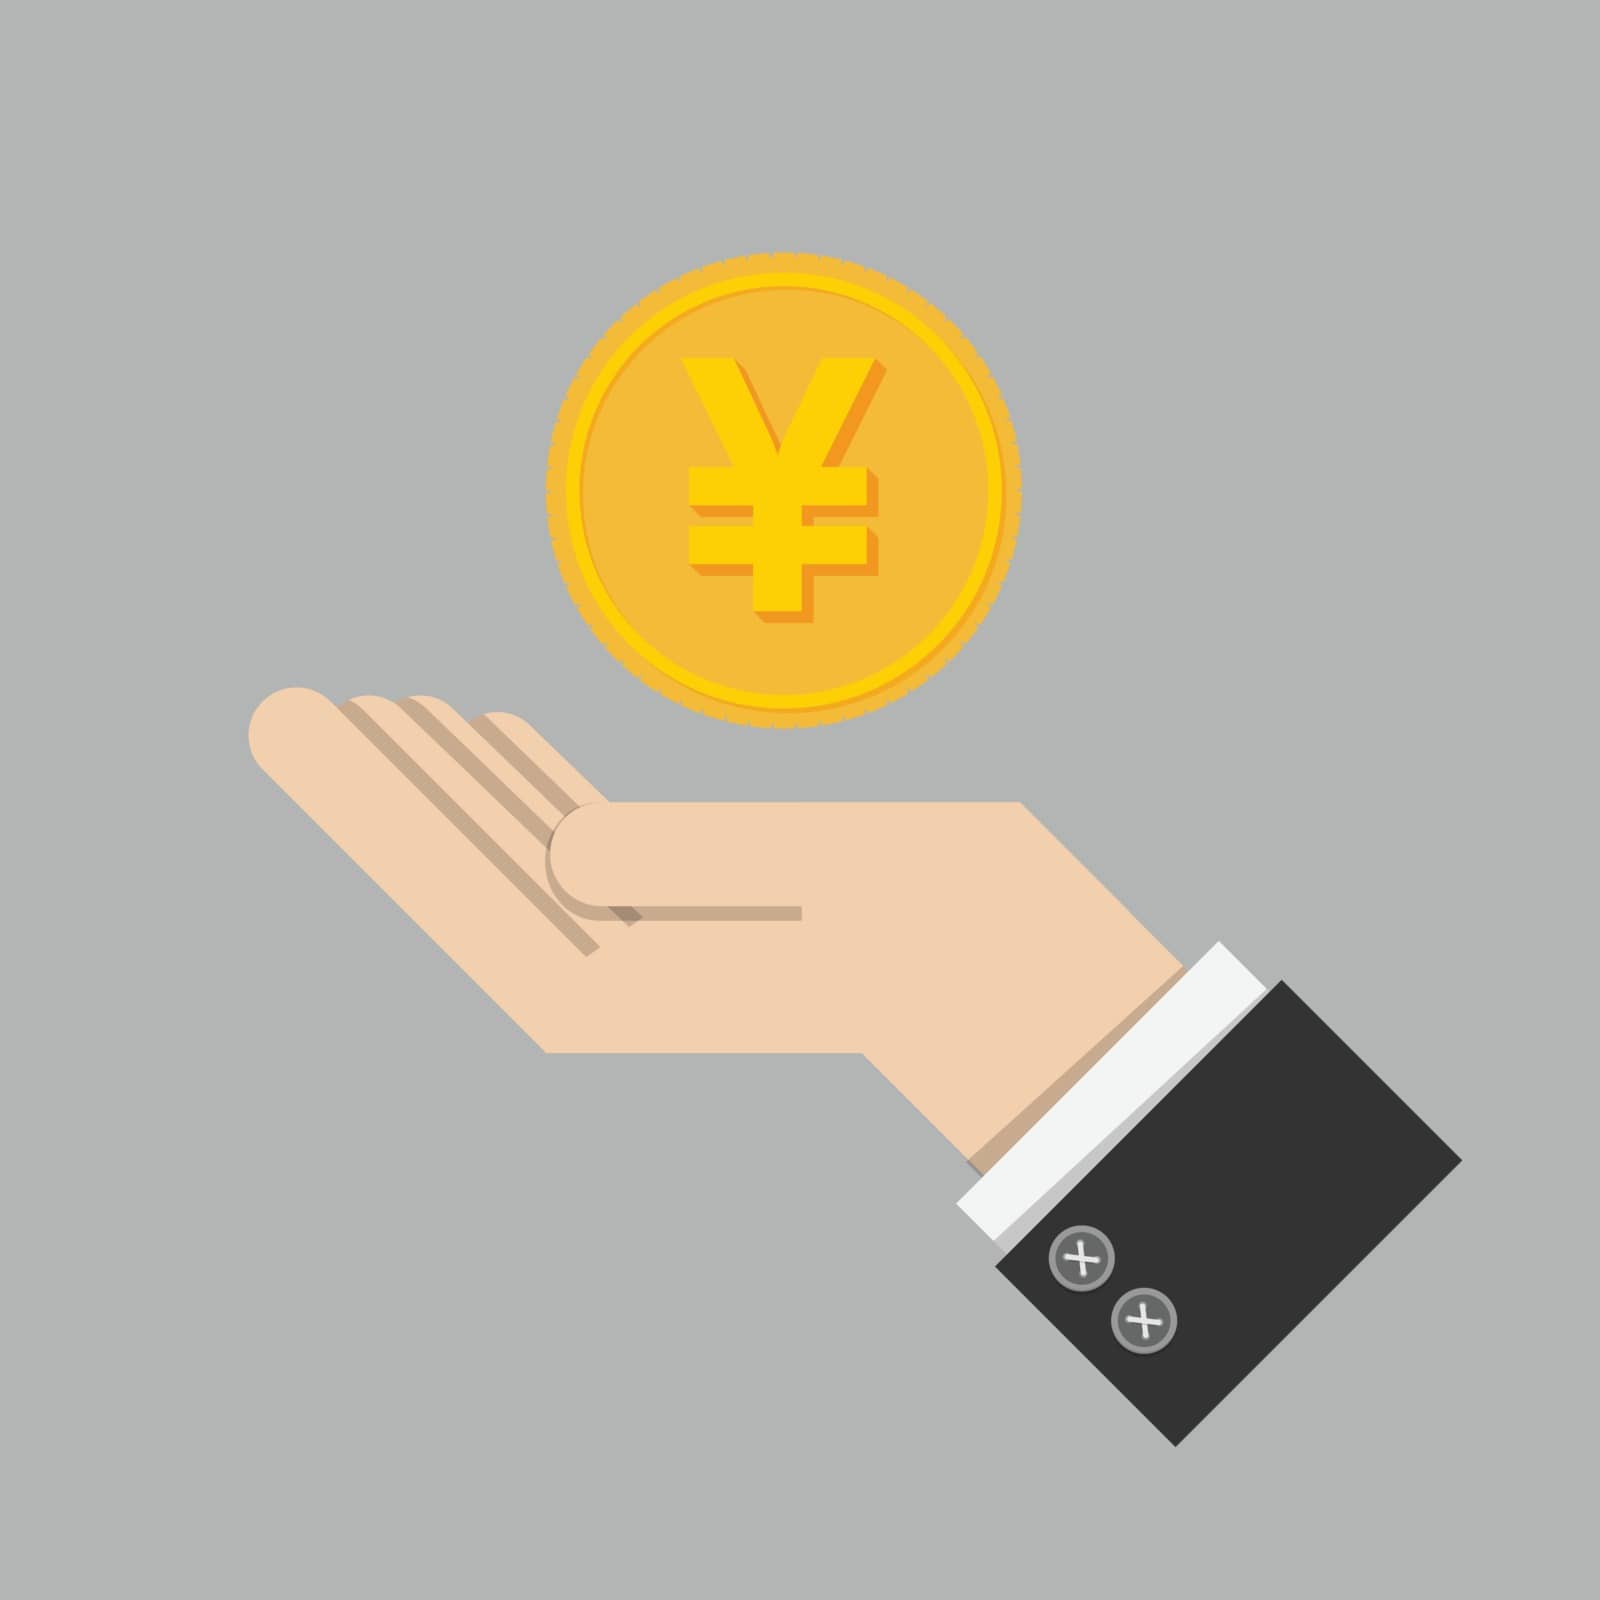 investment return concept. gold coin with sign of Japanese Yen currency on hand, palm of businessman. invest growth, finance plan, personal management, investment portfolio. vector illustration EPS10 by asiandelight